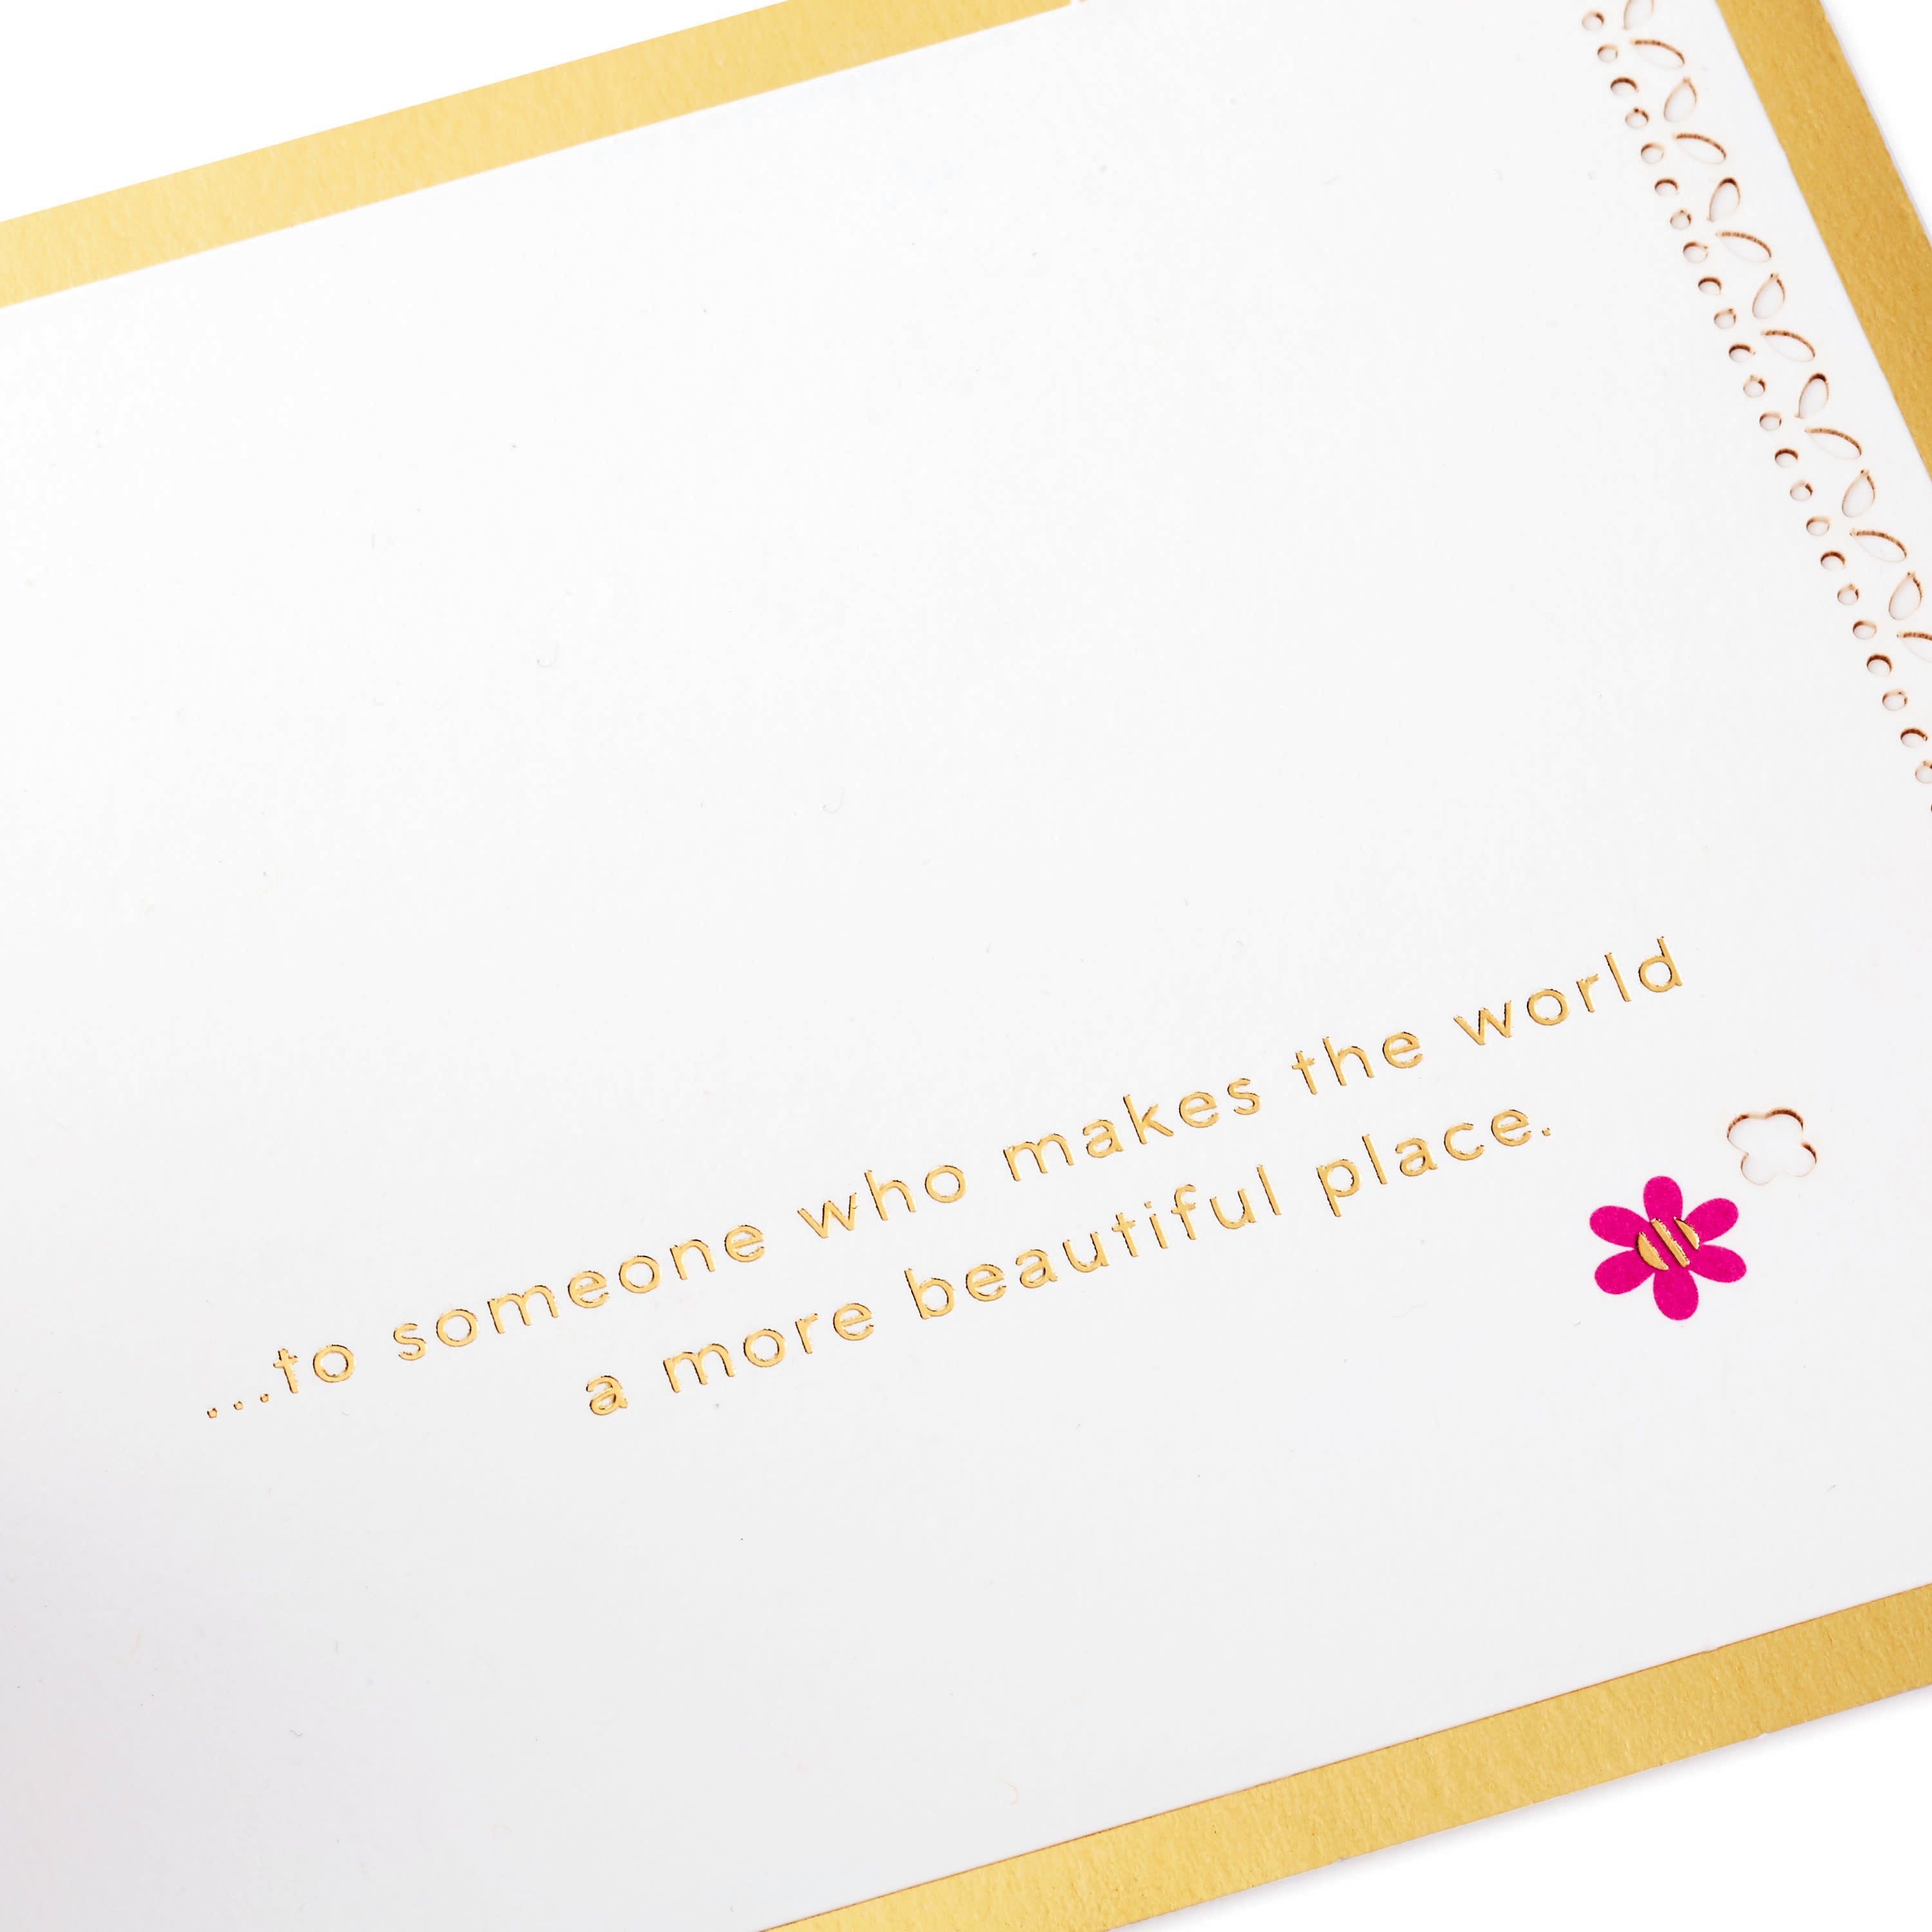 Hallmark Signature Paper Wonder Pop Up Mothers Day Card (Flowers in Vase, Make the World More Beautiful)